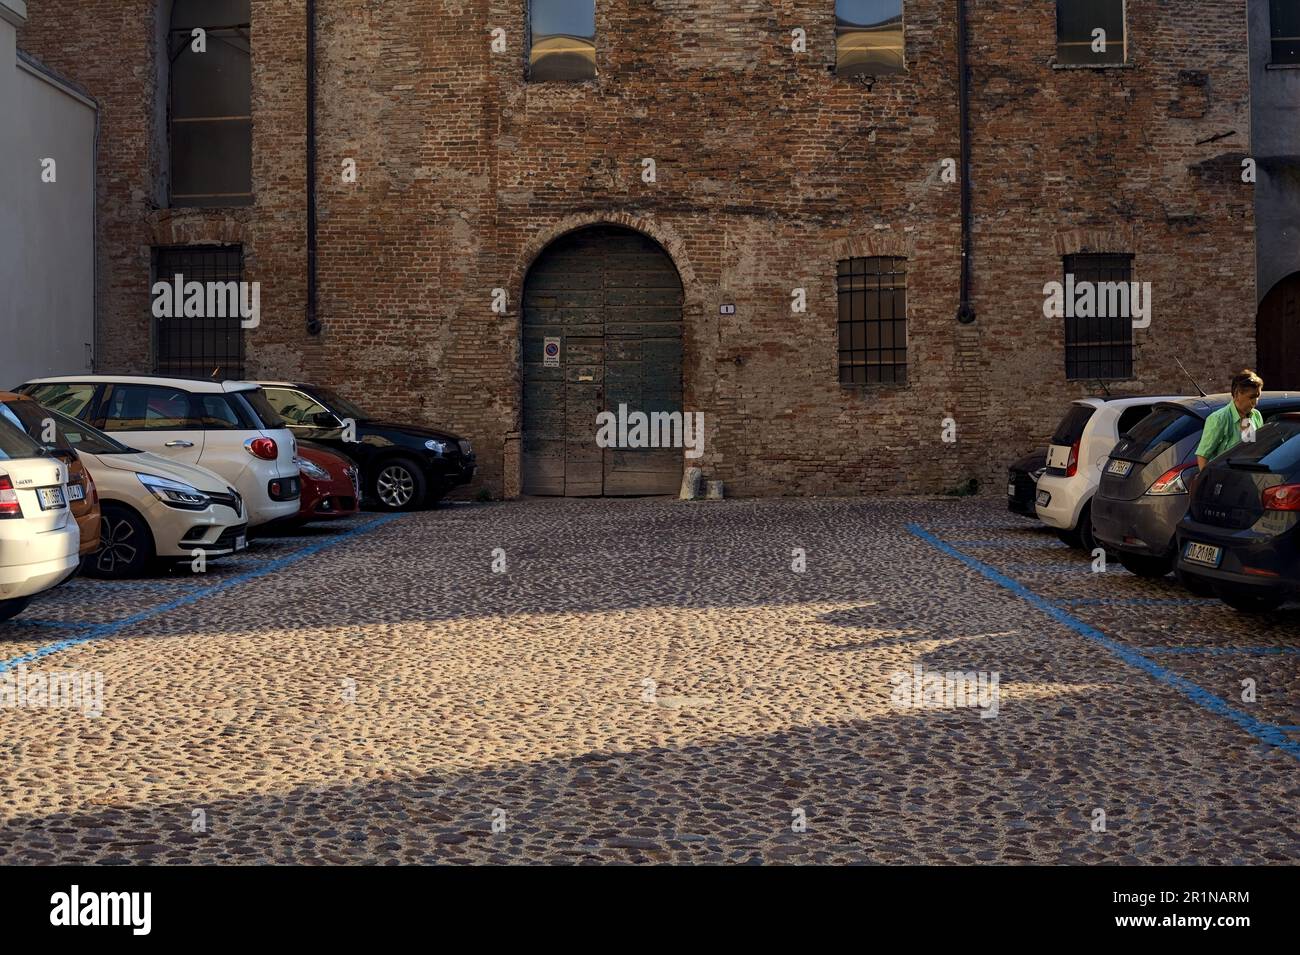 Cobbled square  in the shade with parked cars in front of the facade of a building Stock Photo